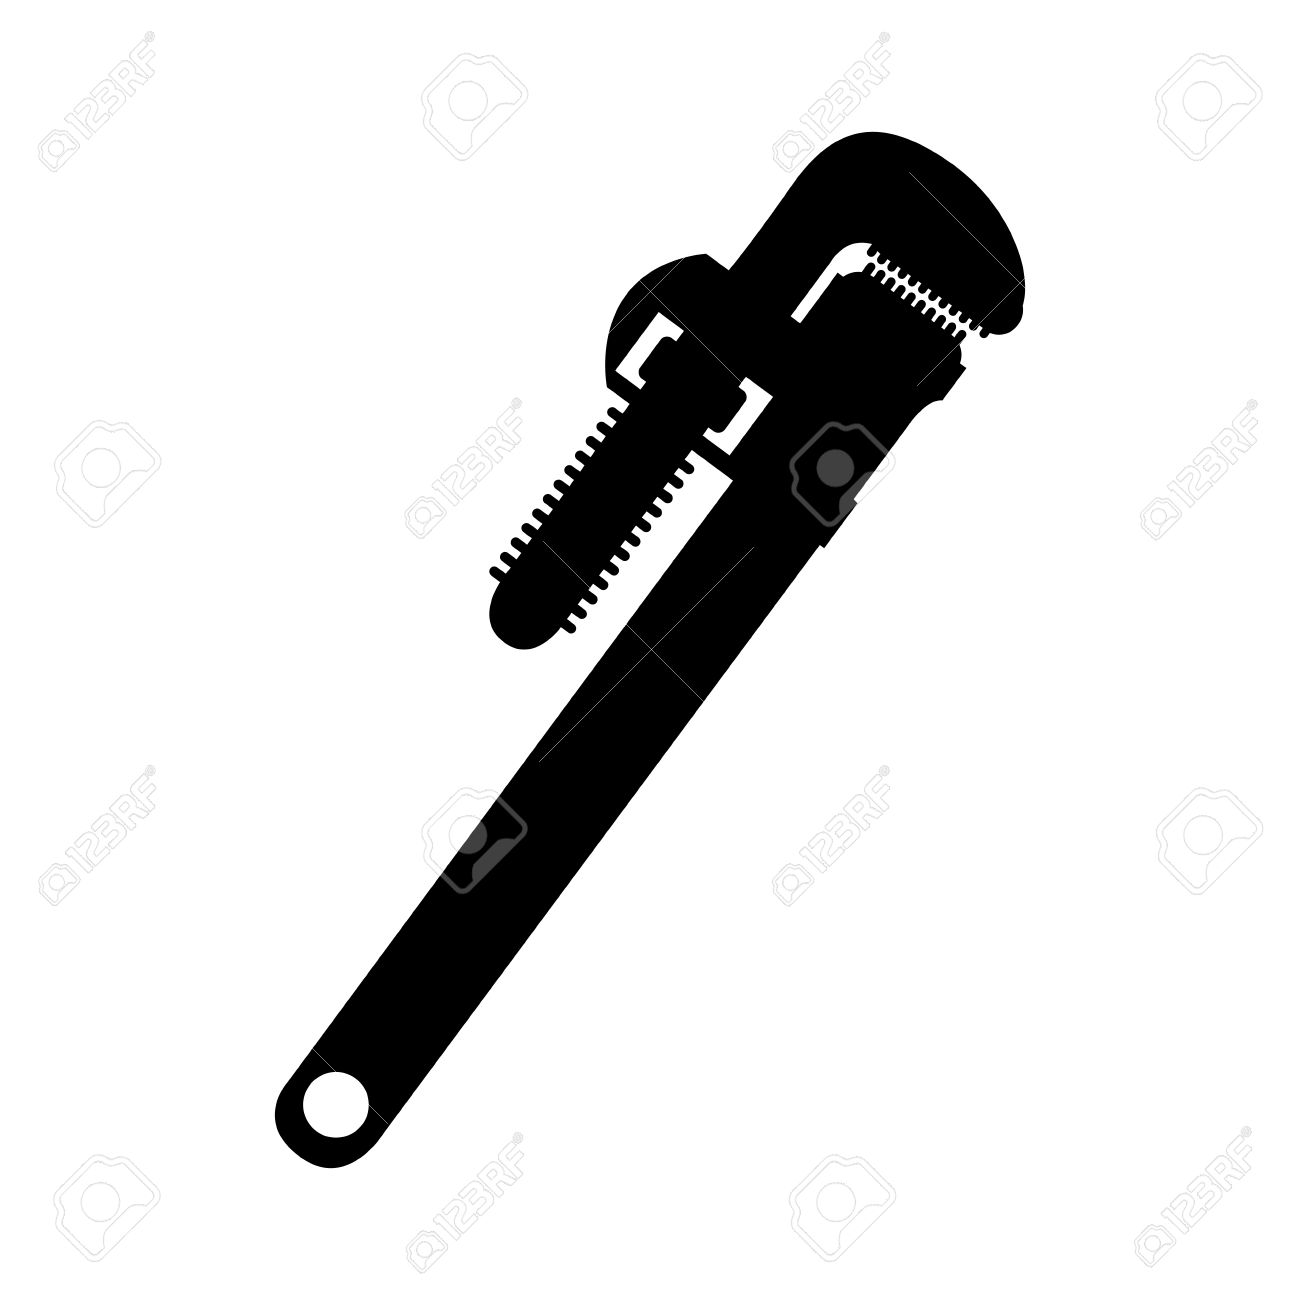 Wrench Vector Icon Stock Vector Art  More Images of Adjustable 